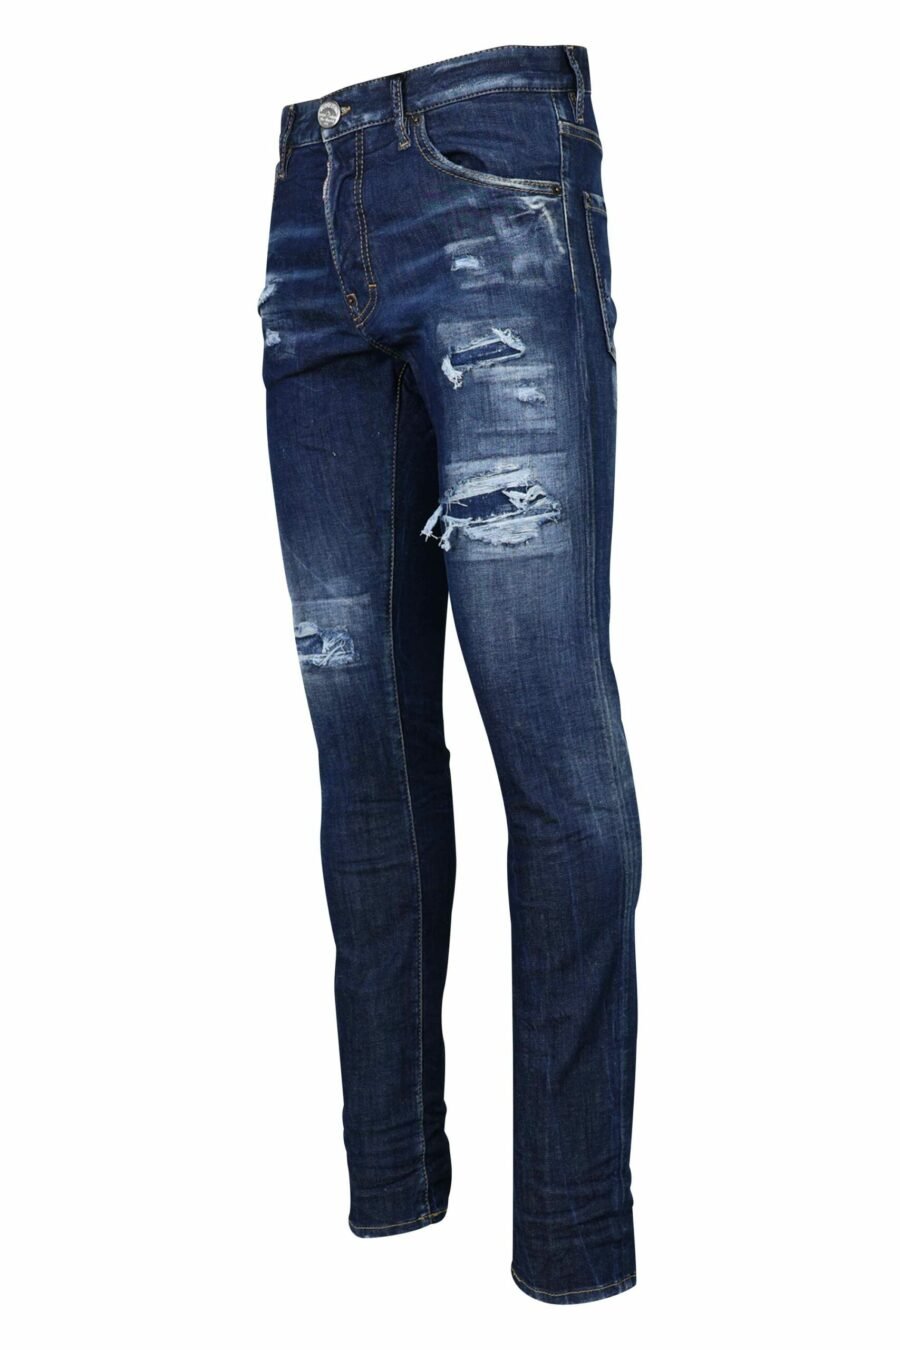 Cool guy jeans blue semi-worn - 8054148105396 1 scaled